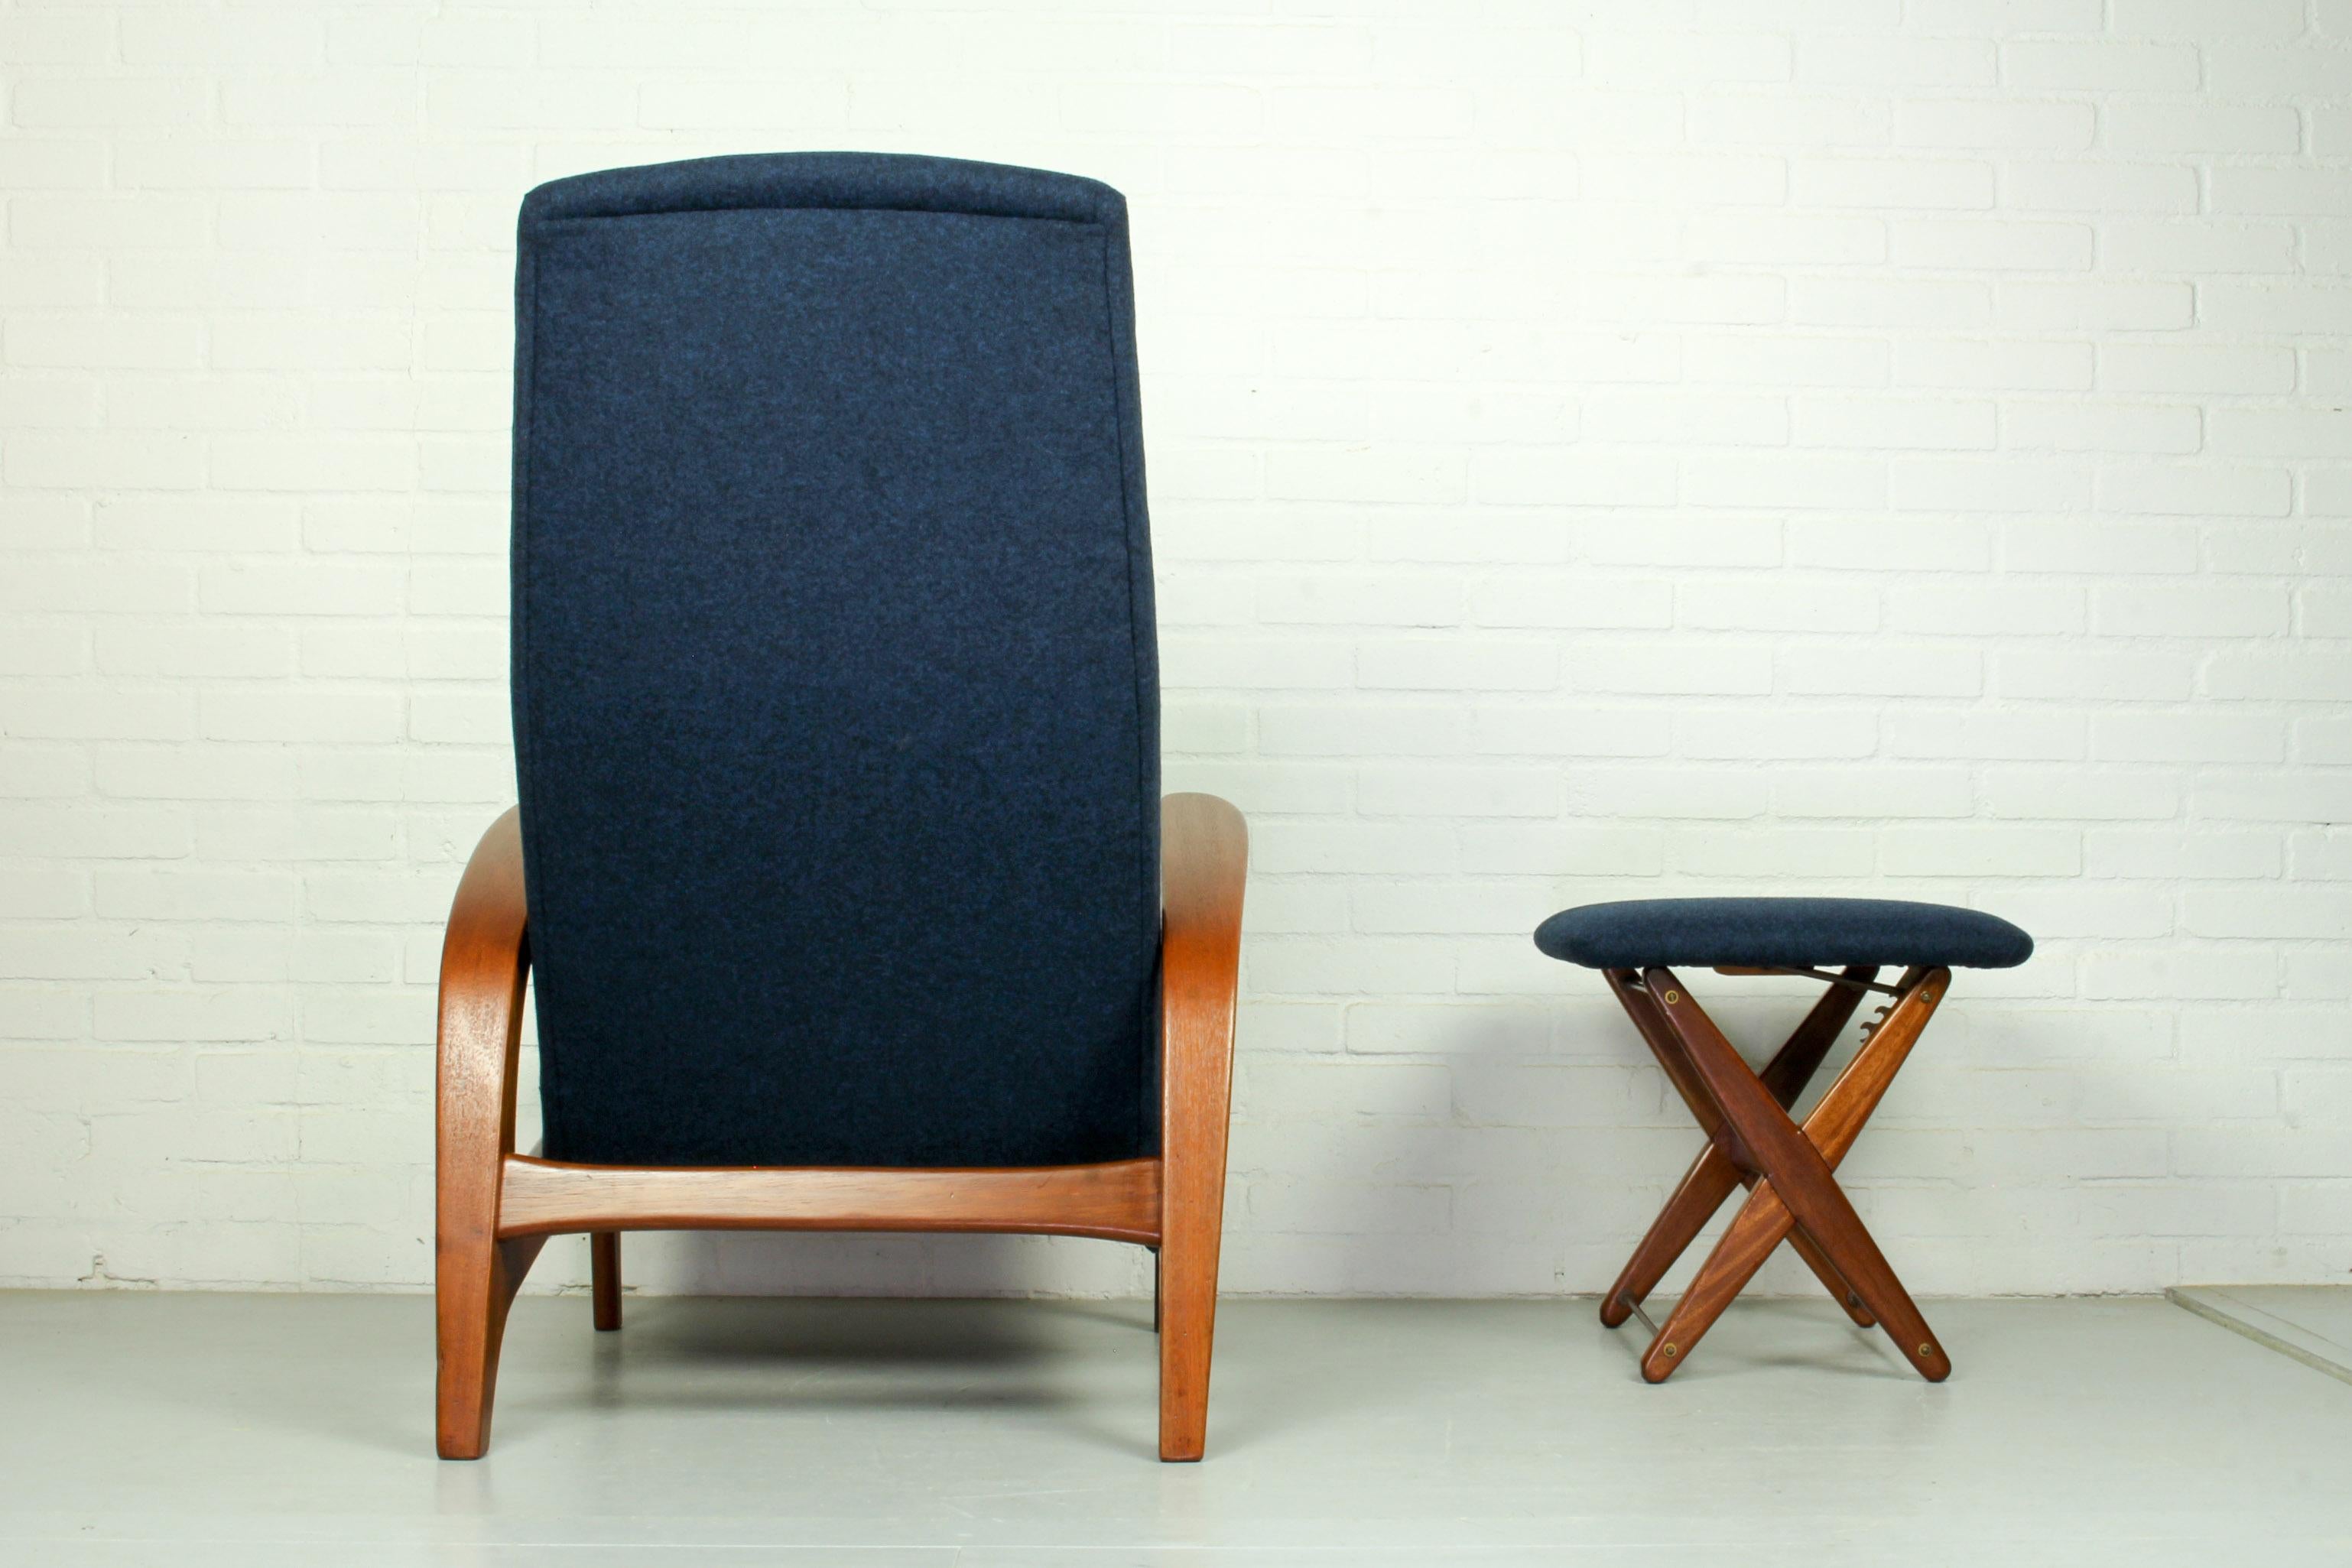 Dutch Rock n Rest Lounge Chair and Foot Stool by Gimson & Slater, circa 1960